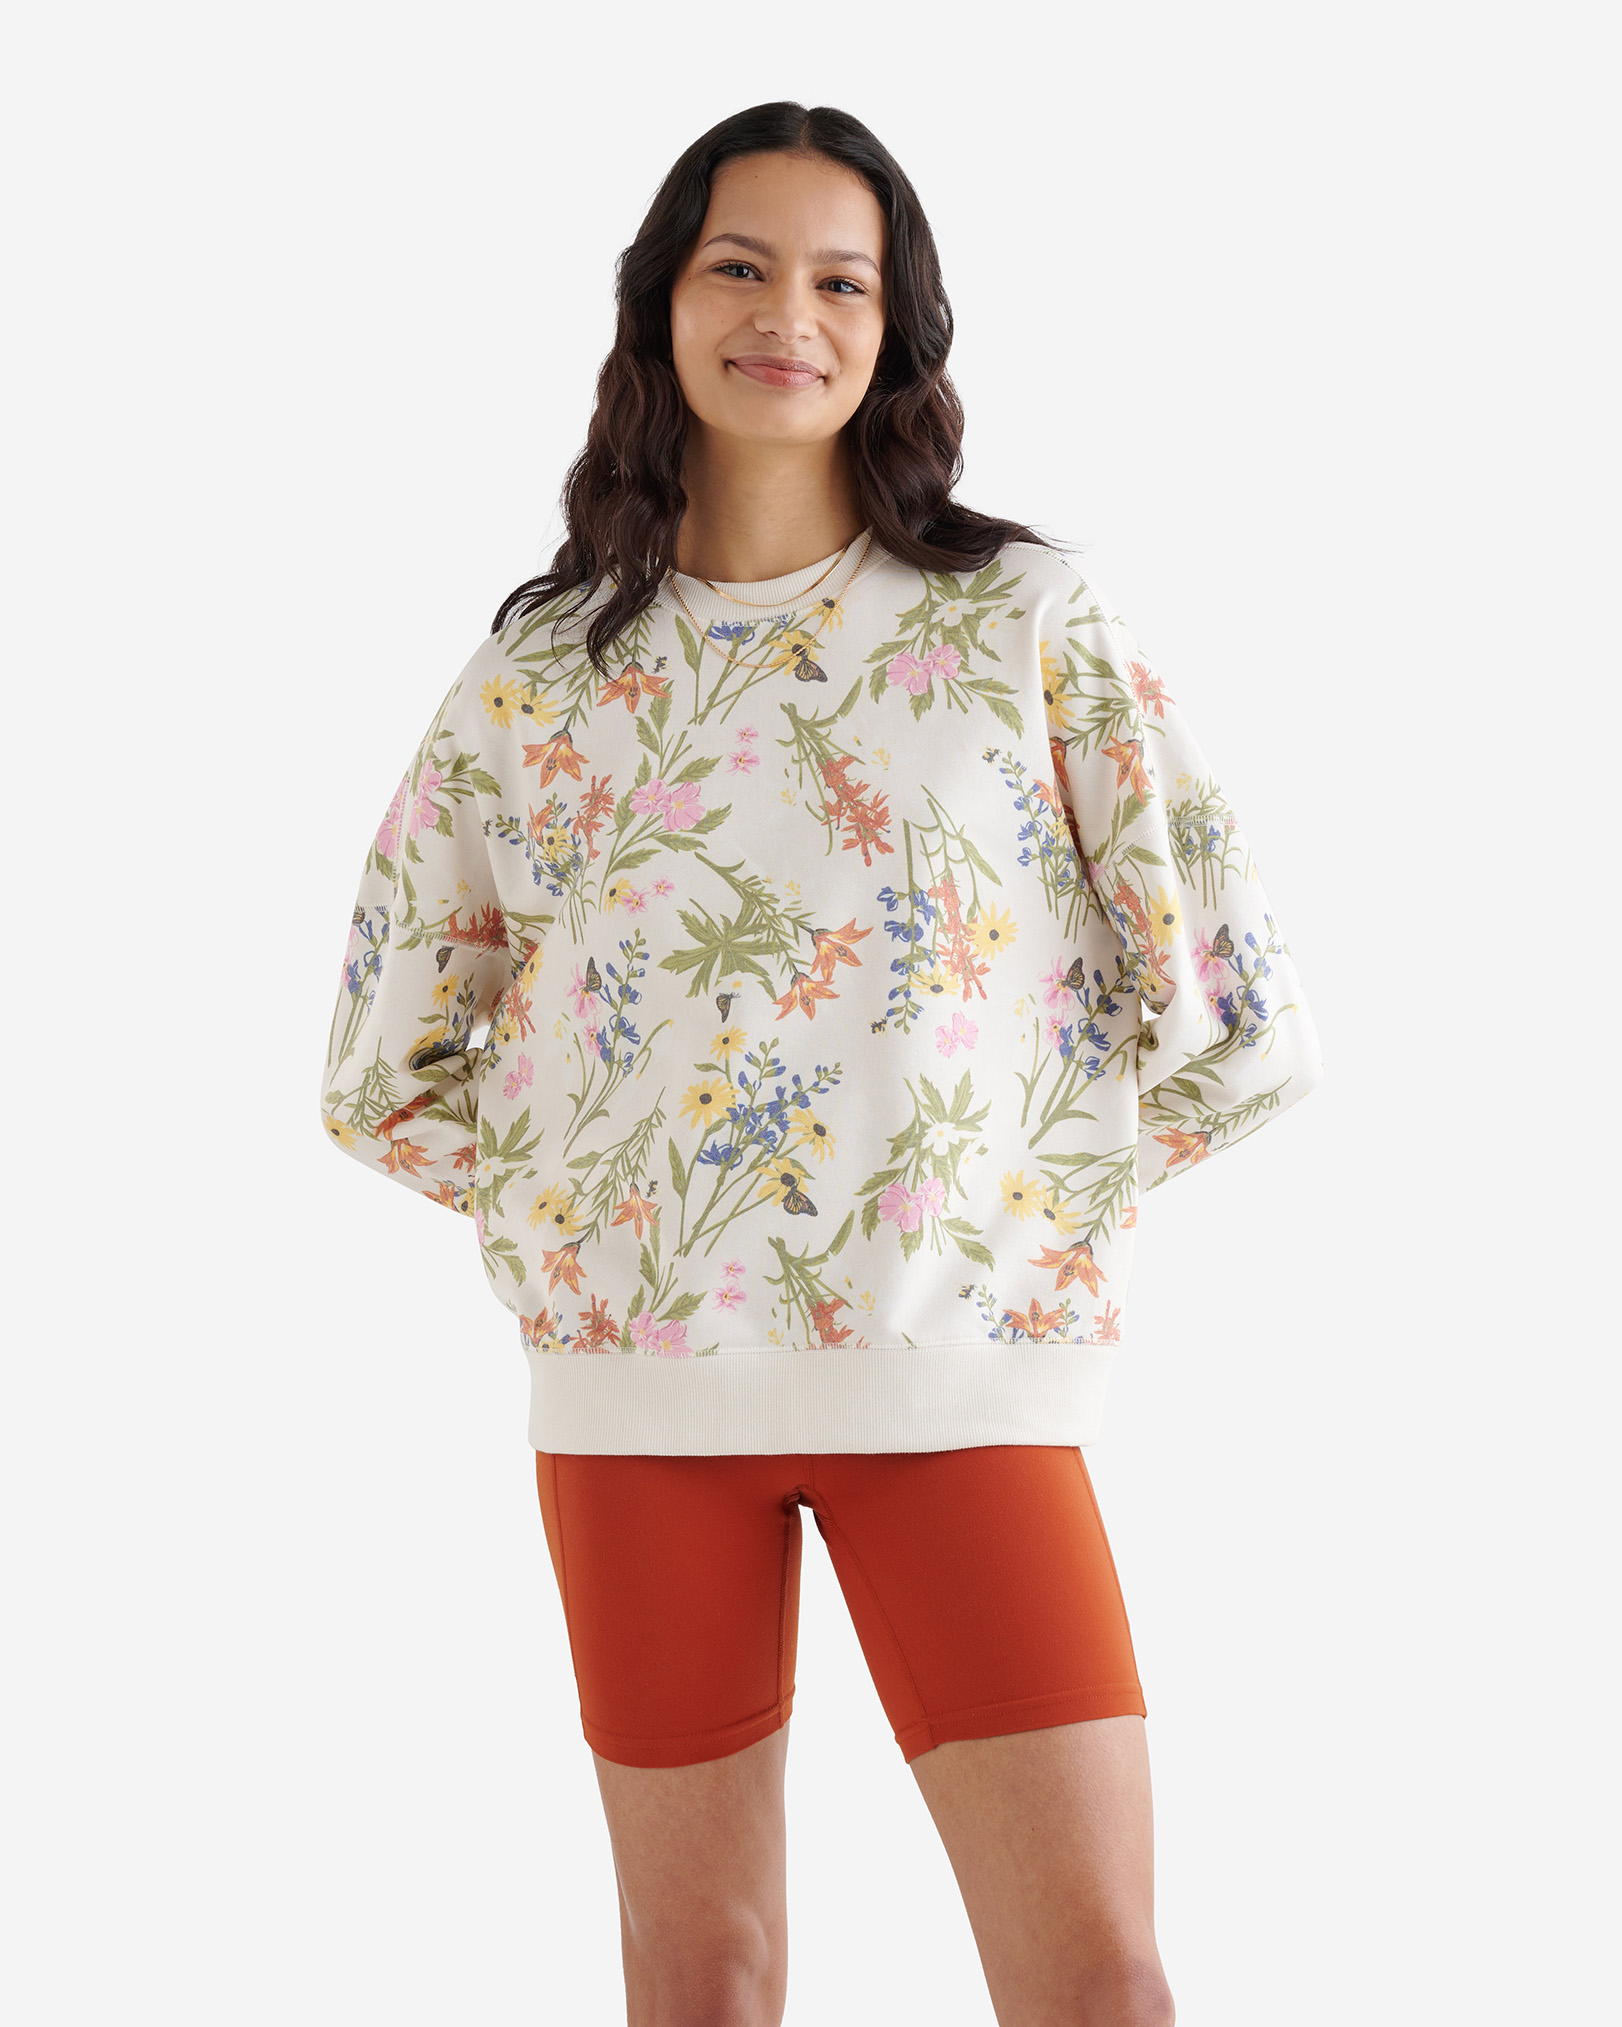 Roots Floral Relaxed Crew Shirt in Turtledove Cream